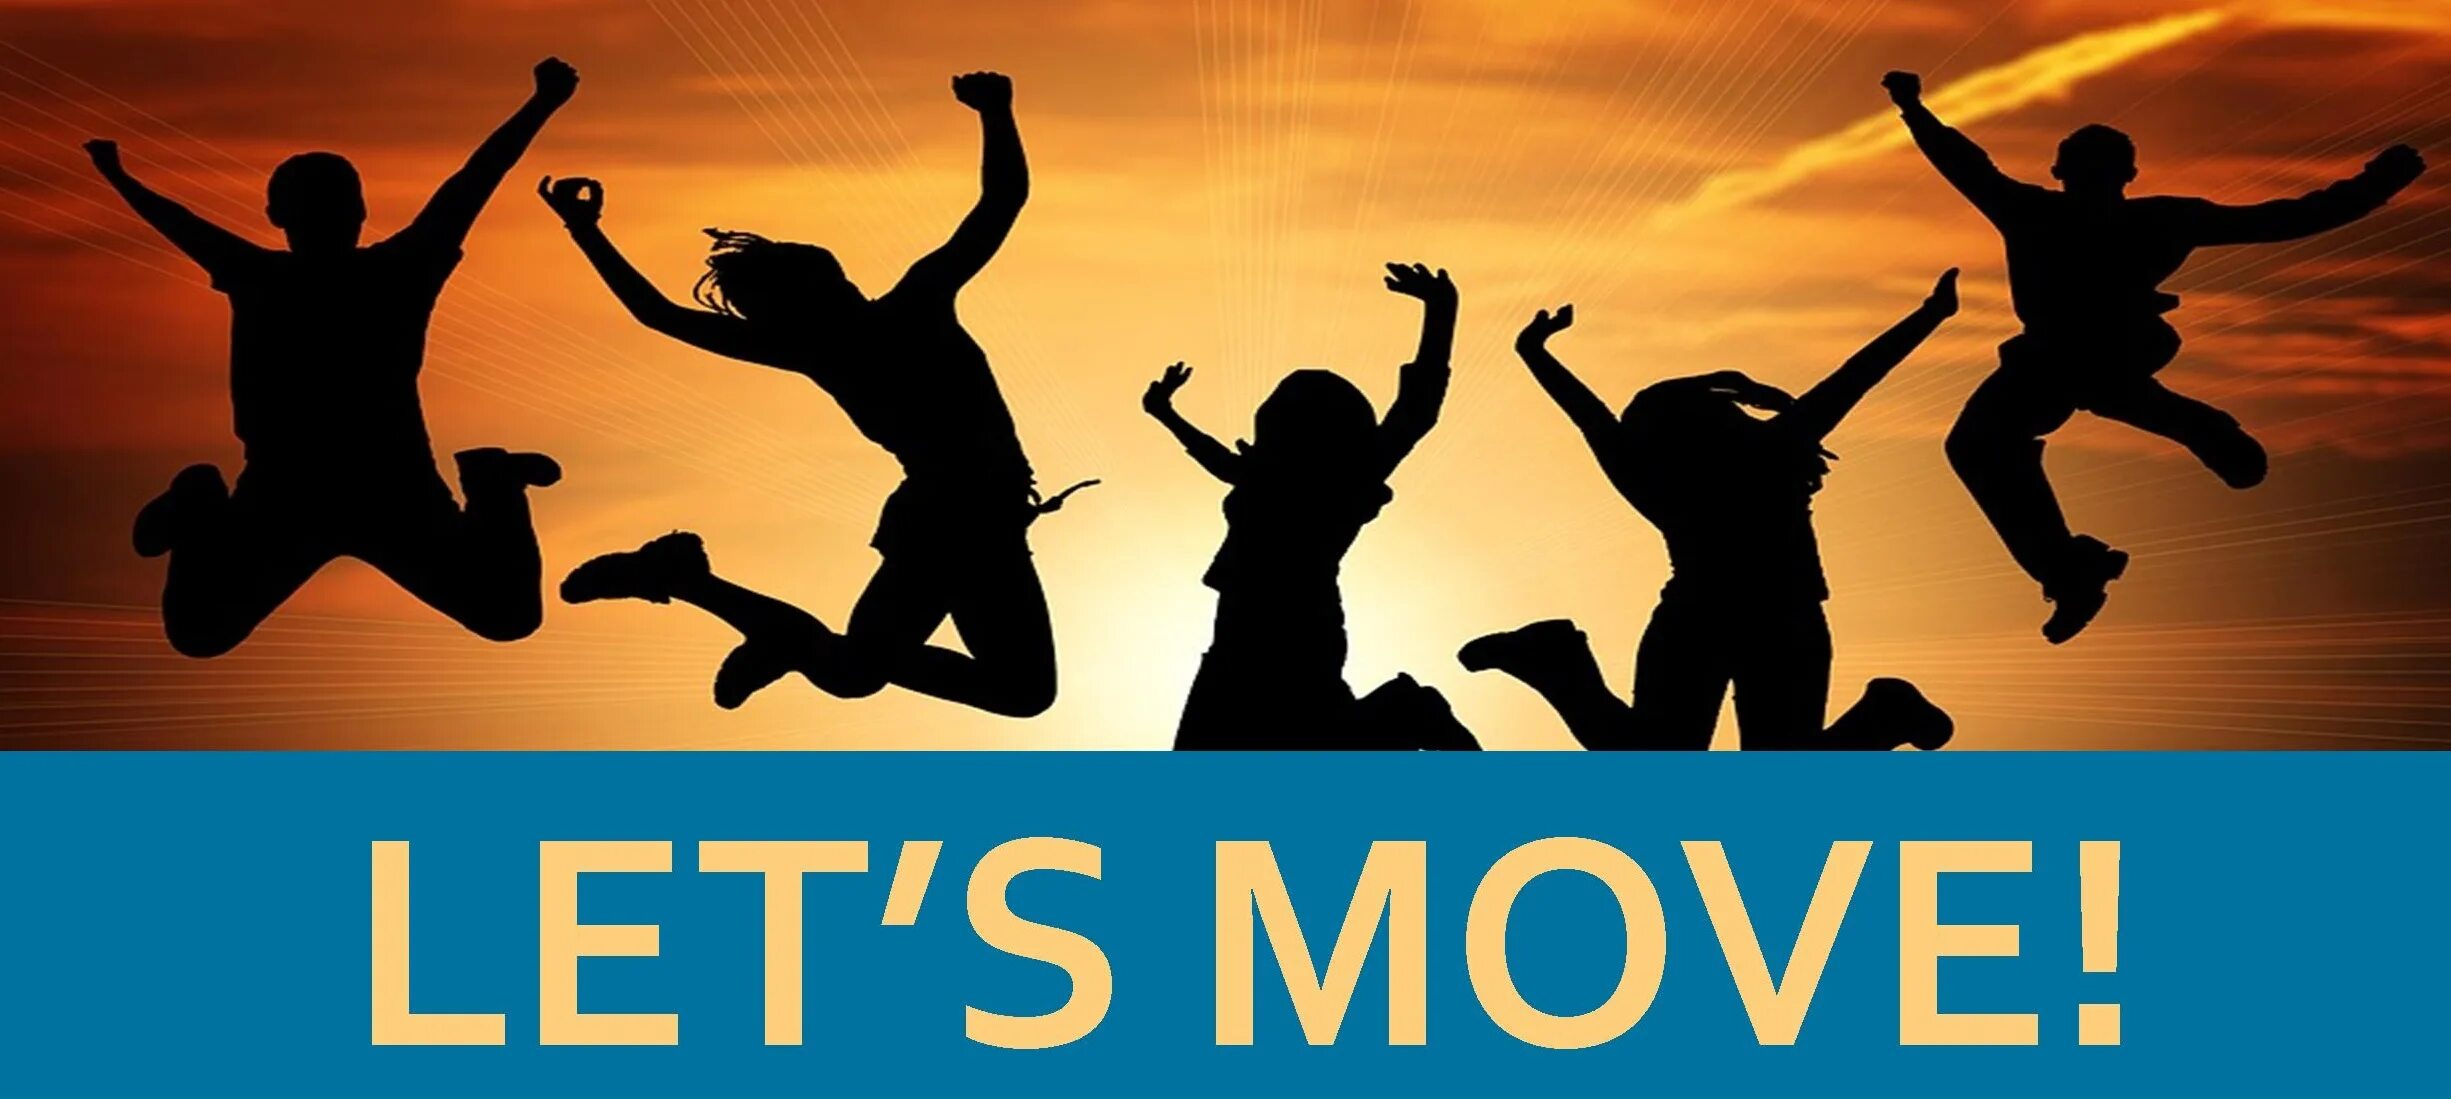 Live move now. Let's move. Move картинка. Lets move Sports. Move надпись.